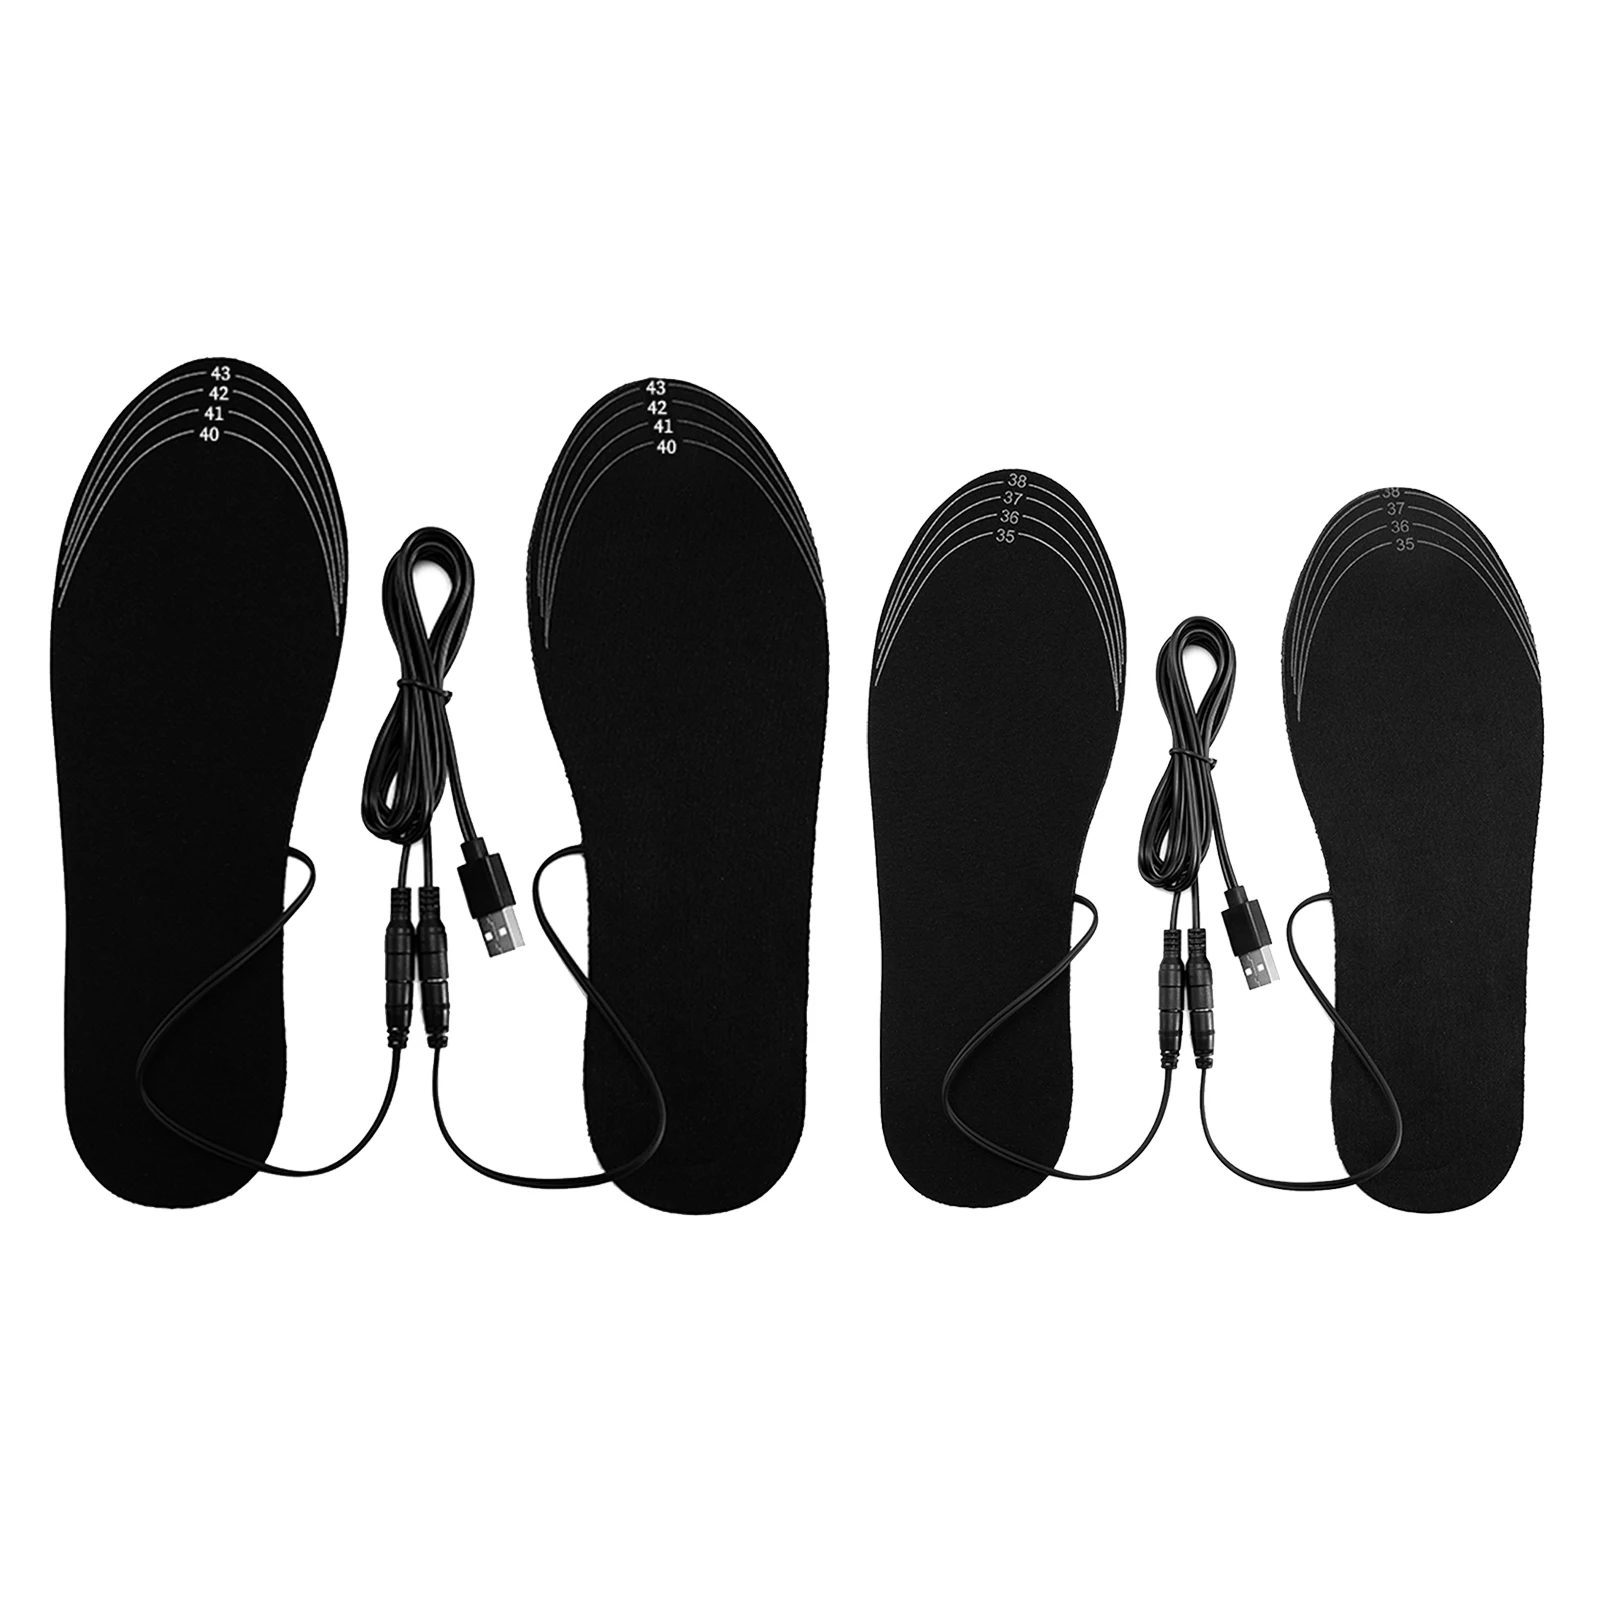 Unisex Winter Warmer Foot USB Charging Electric Heated Insoles For Shoes Heating Insole Boots Cuttable Rechargeable Heater Pads